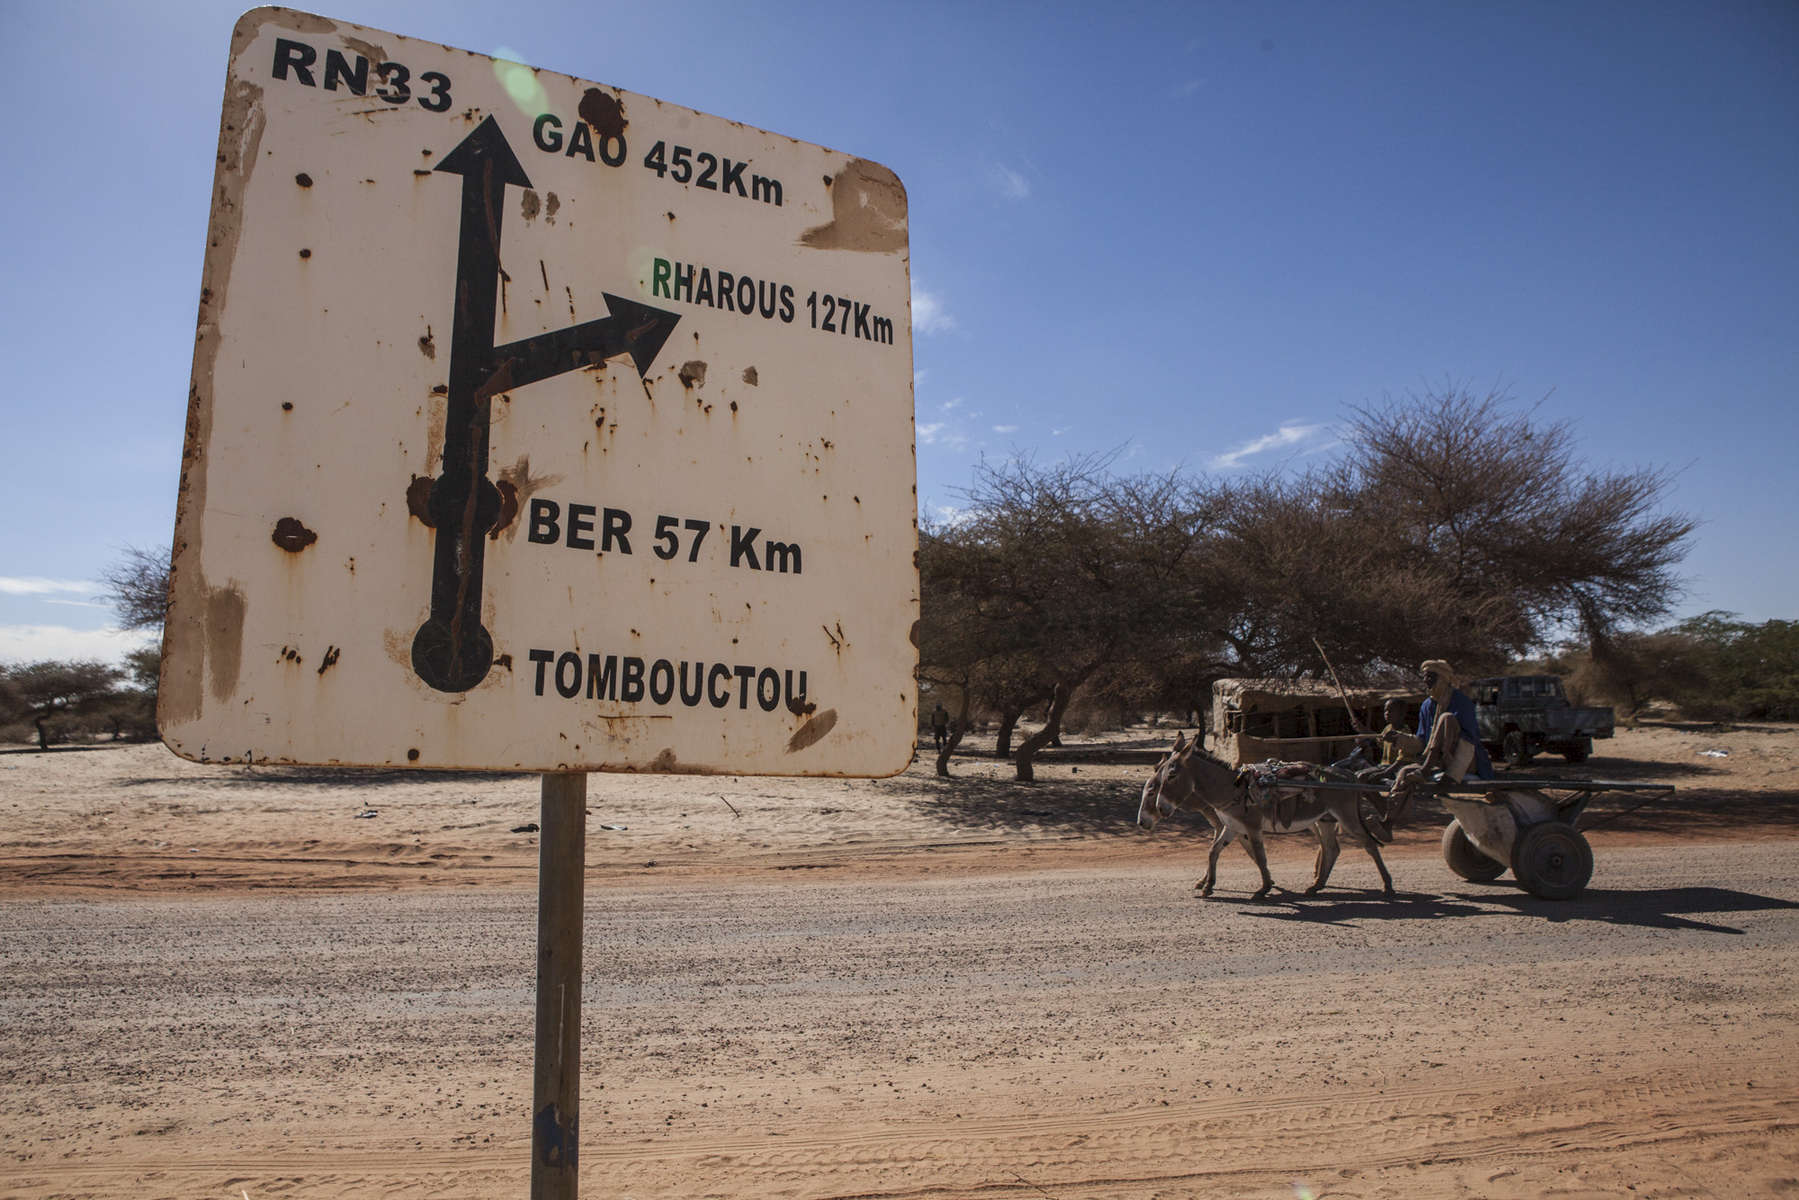 A sign post measuring the distance between Timbuktu and other northern towns on the outskirts of Timbuktu, Mali on Tuesday, January 10, 2017.